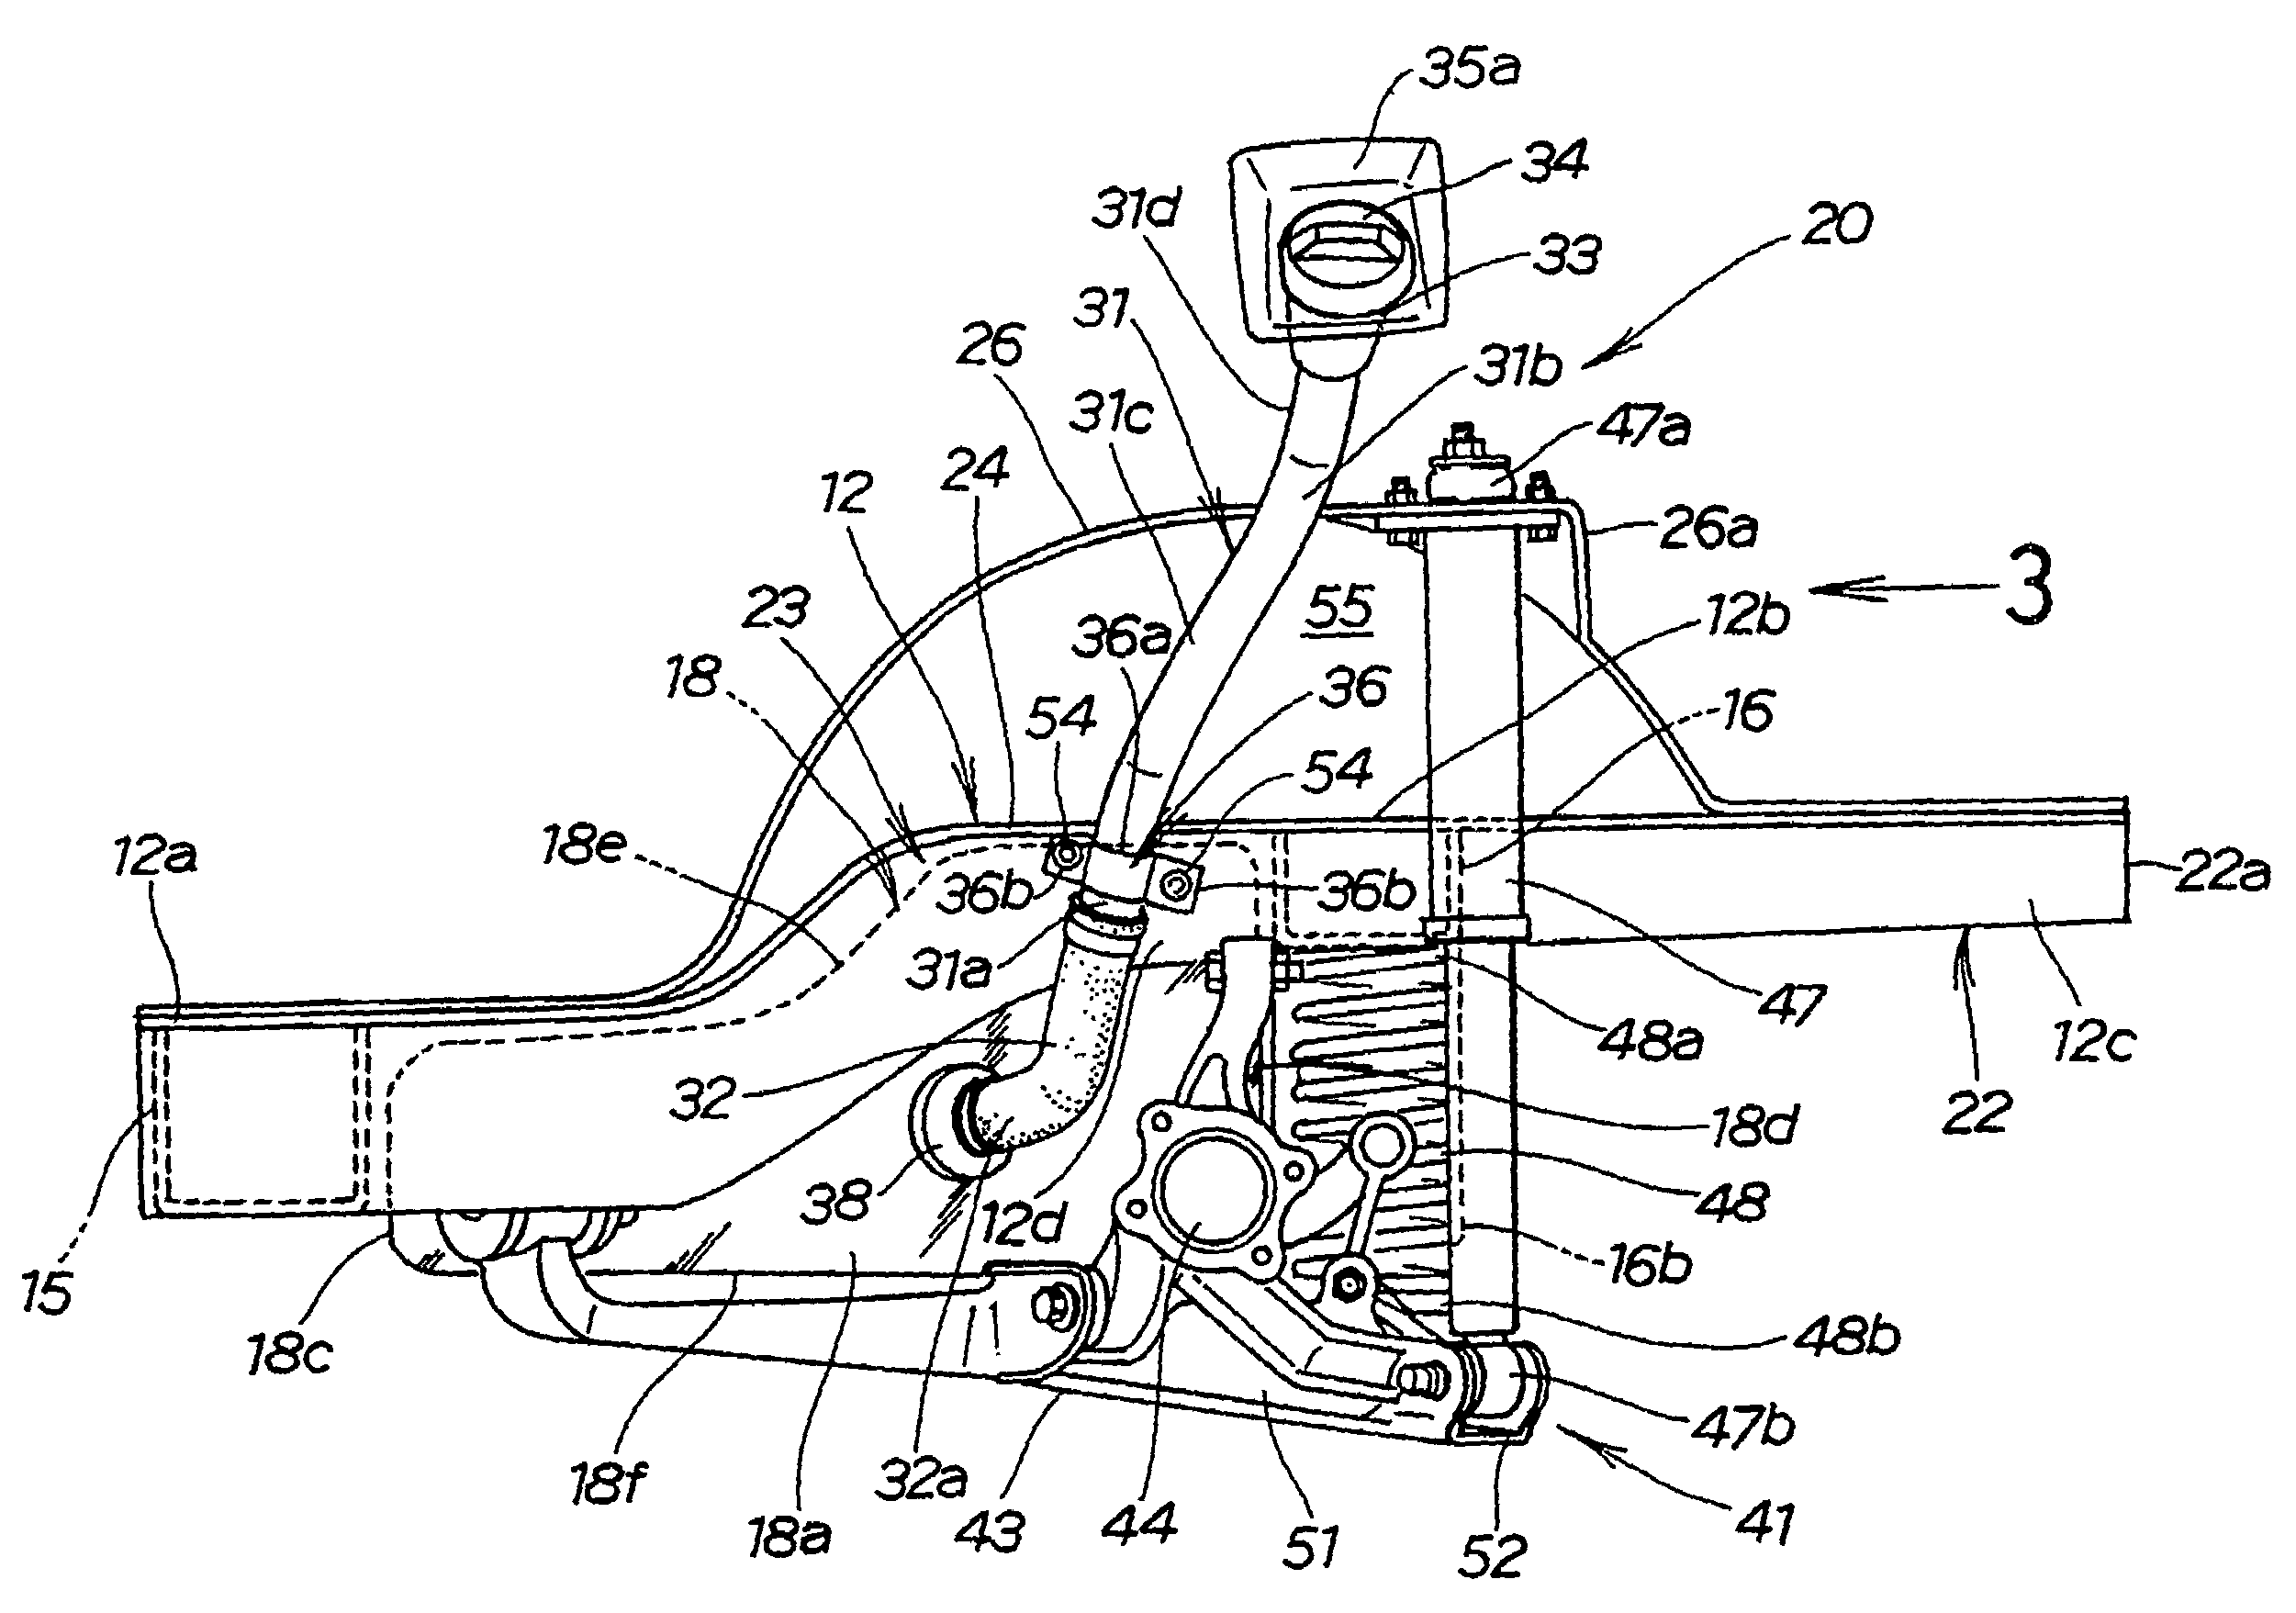 Filler pipe arranging structure for vehicle